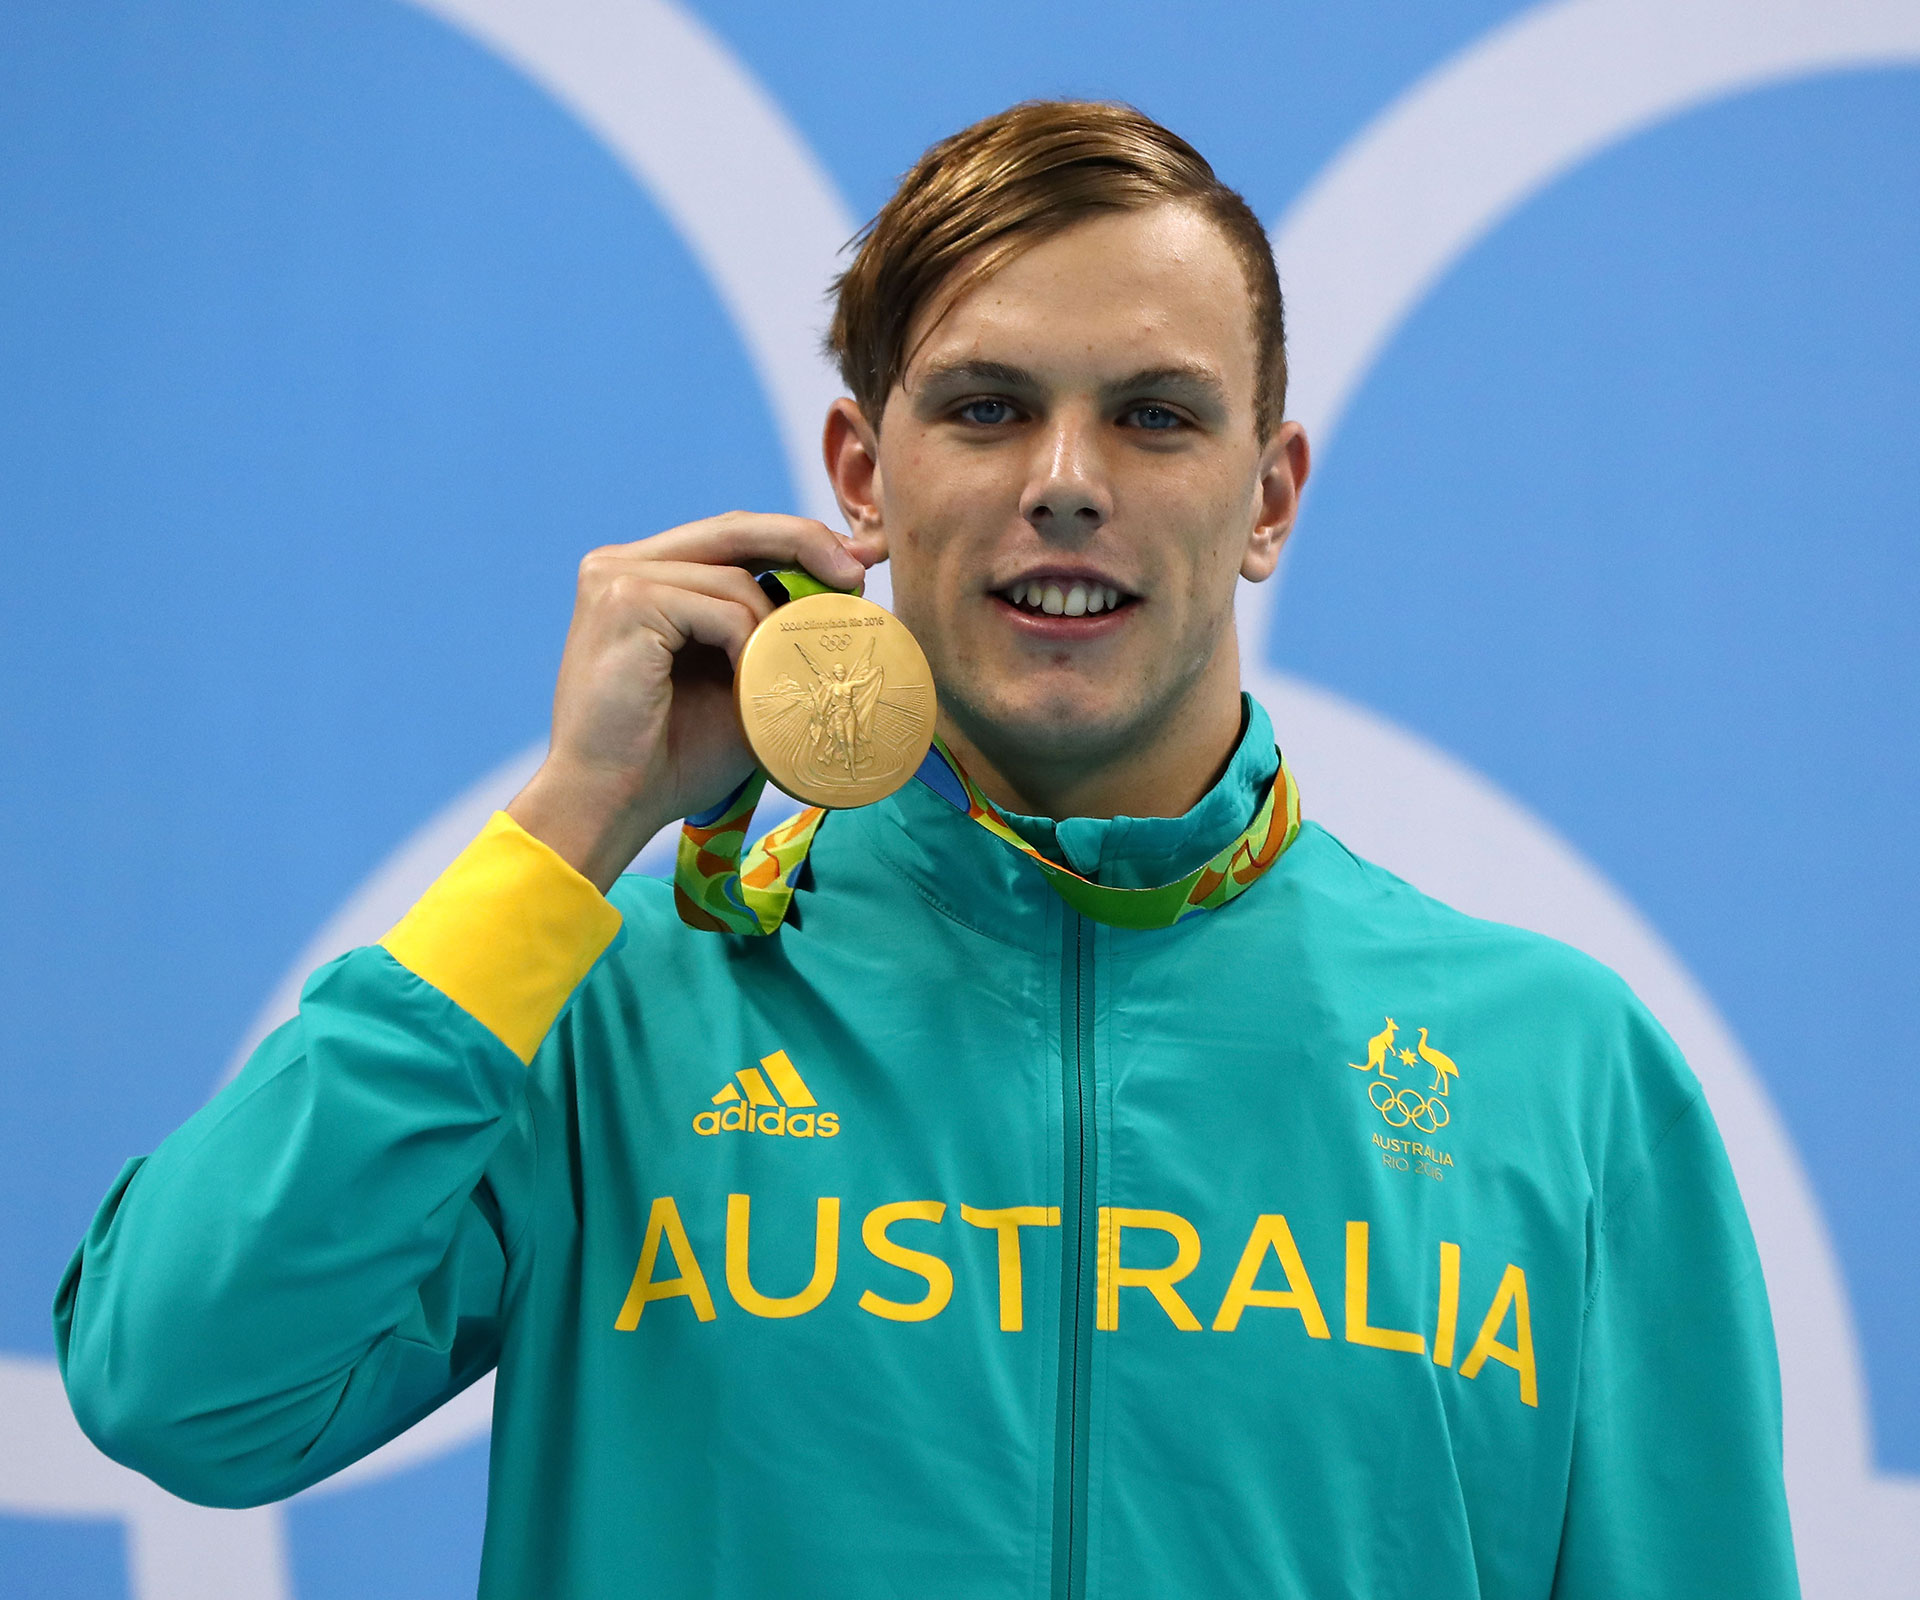 Aussie schoolboy Kyle Chalmers becomes surprise Olympic champion